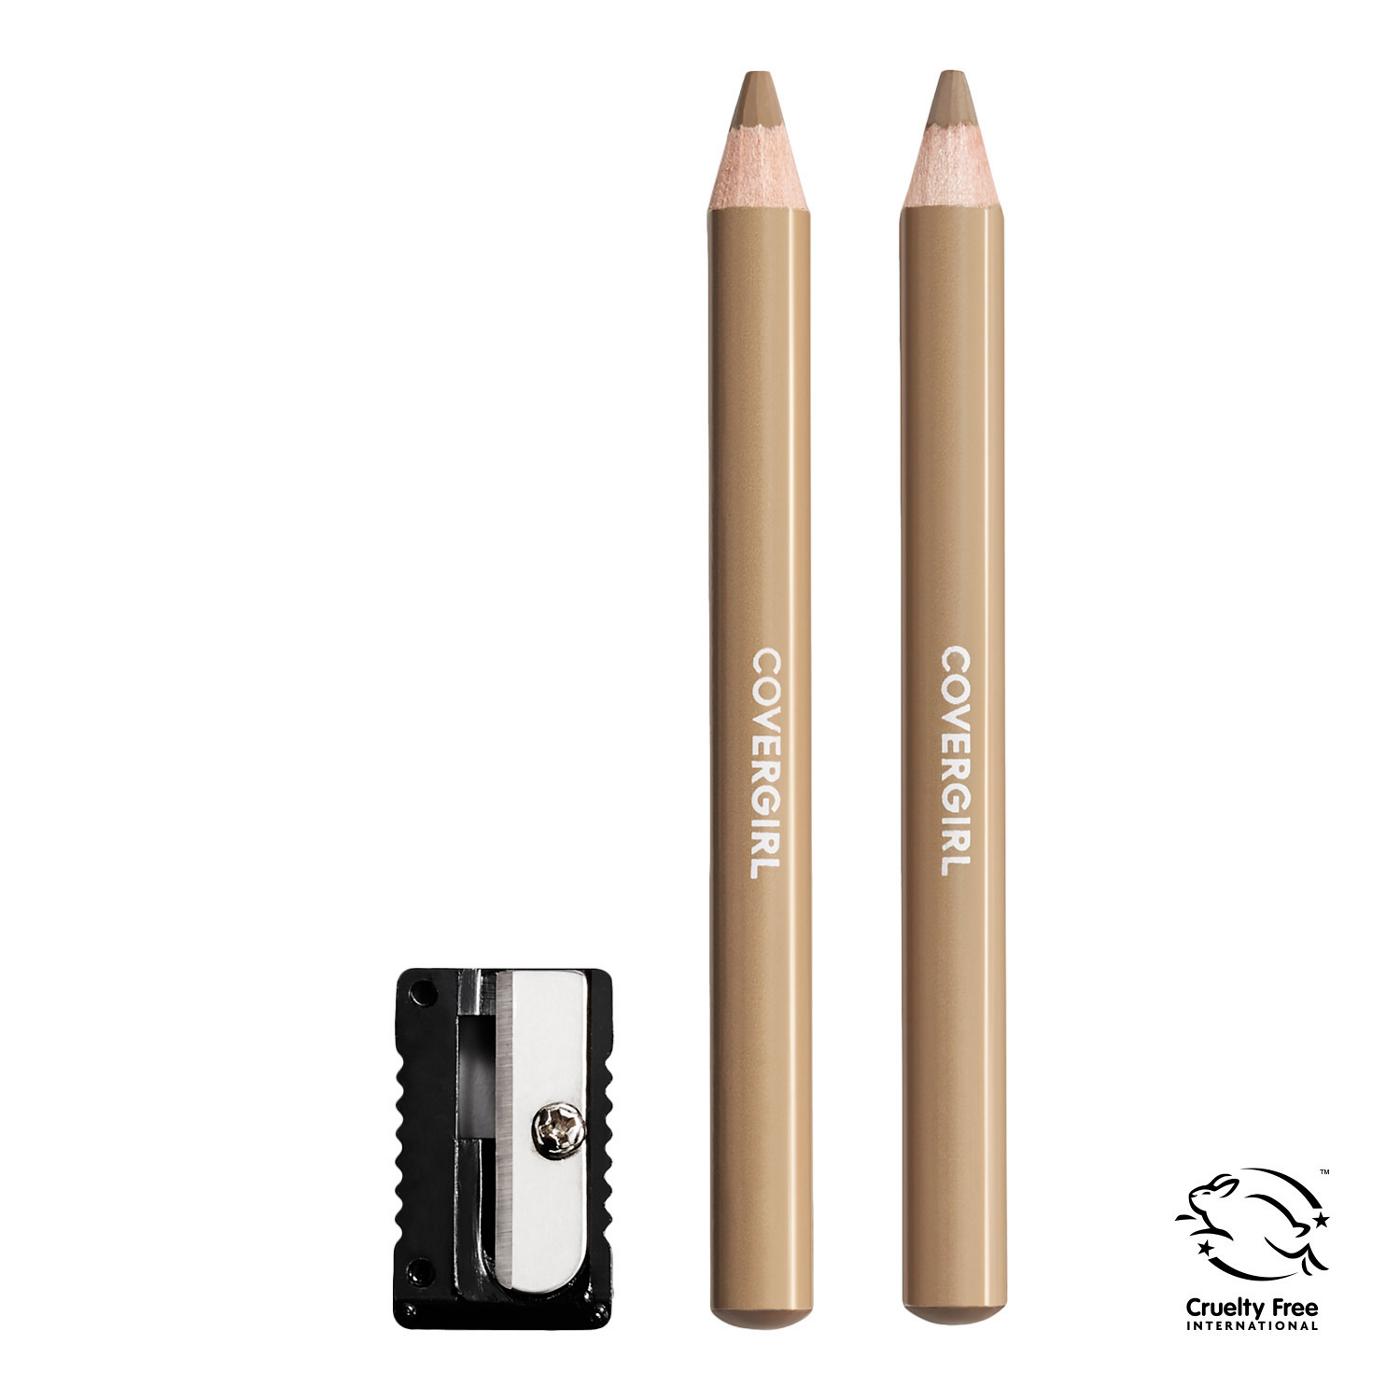 Covergirl Easy Breezy Brow Fill Define Pencils 520 Soft Blonde Shop Brow Pencils And Powder At